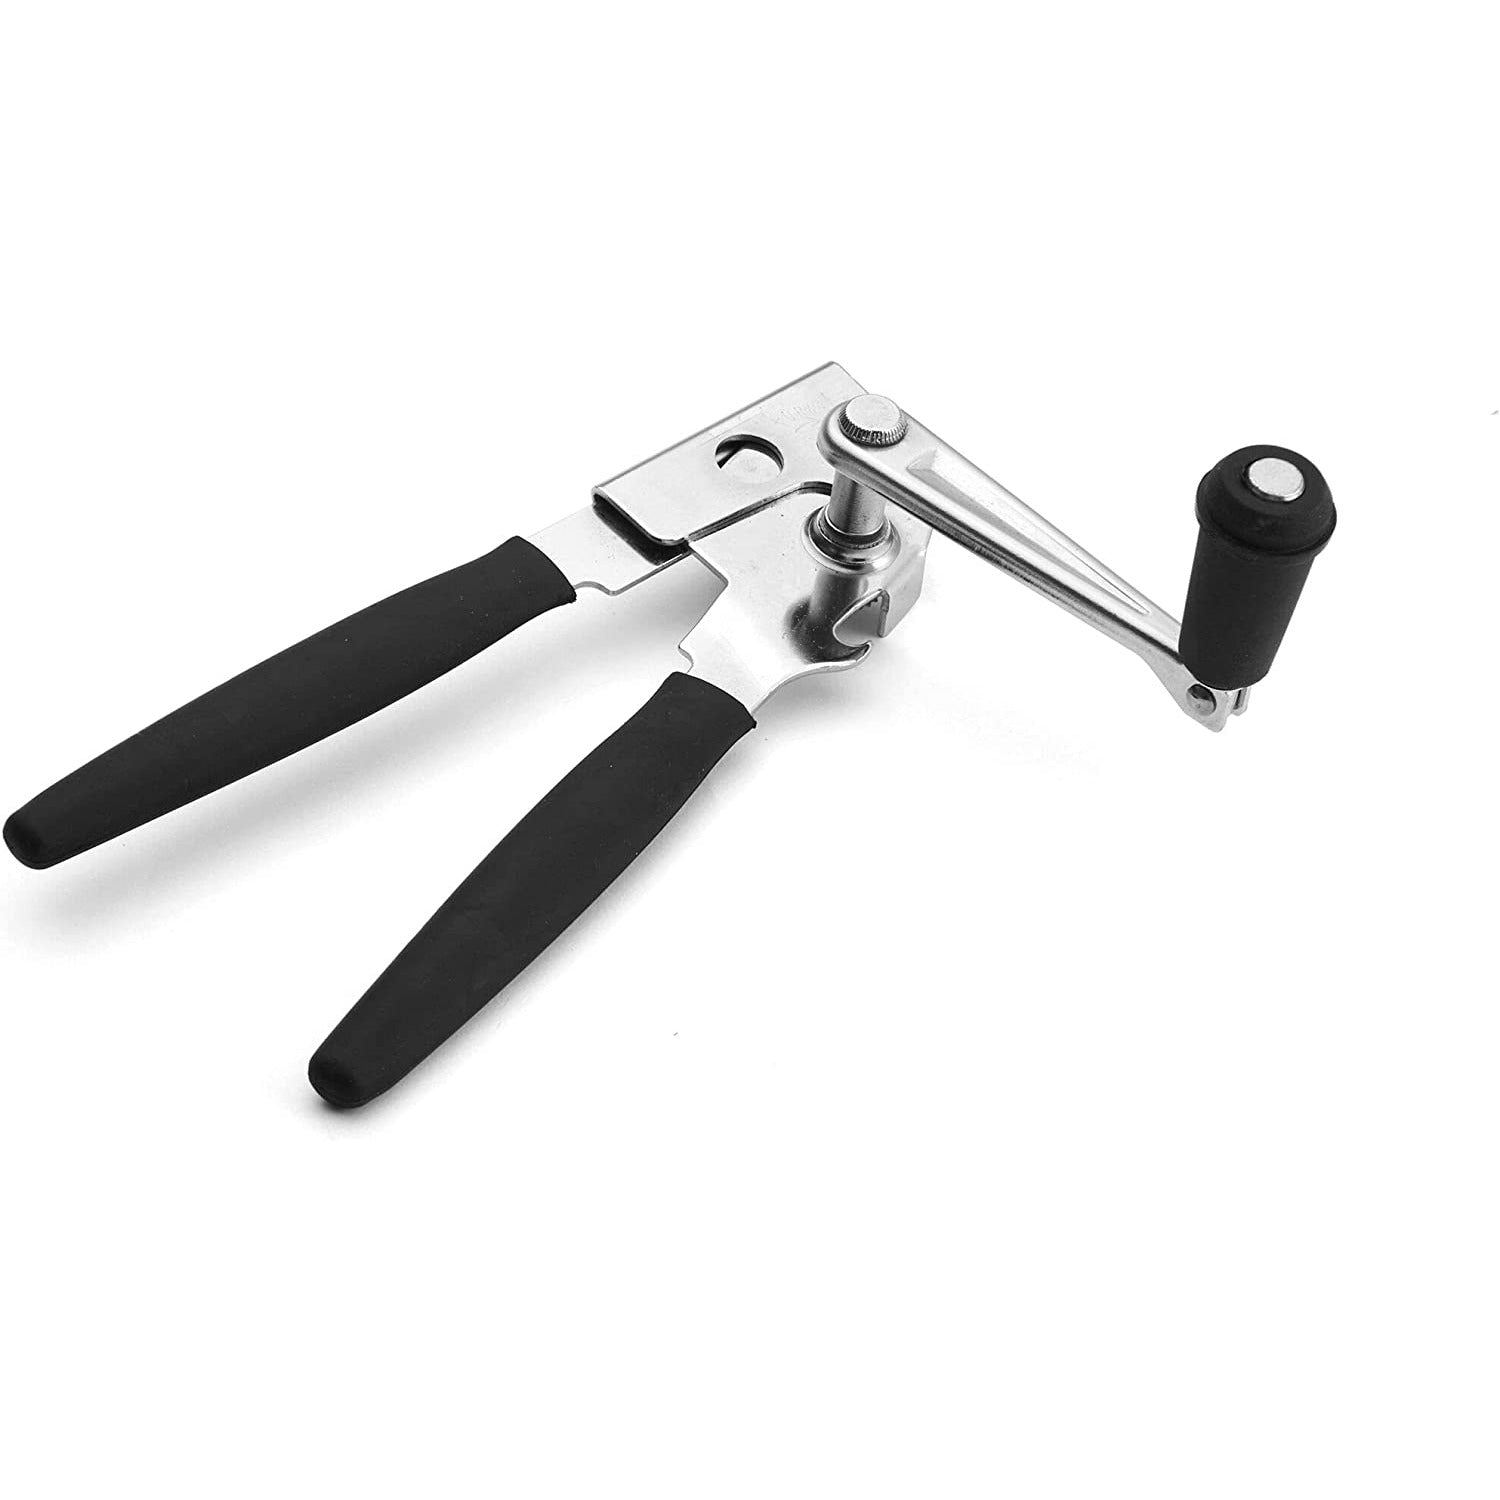 Swing-A-Way Easy Crank Can Opener with Built-In Bottle Opener, Green